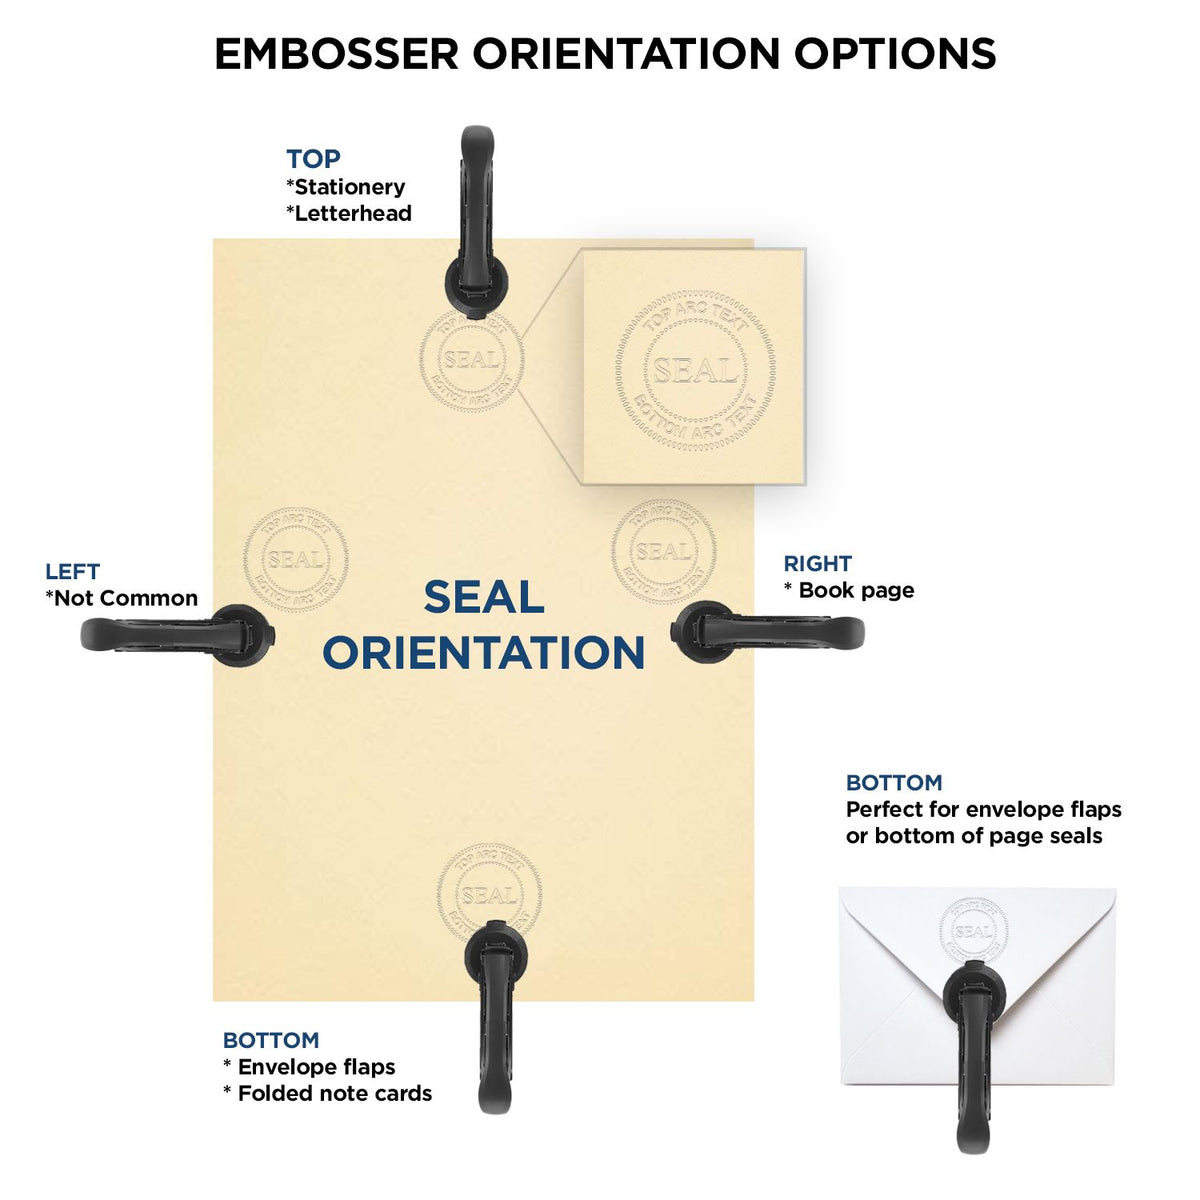 An infographic for the Handheld Louisiana Architect Seal Embosser showing embosser orientation, this is showing examples of a top, bottom, right and left insert.